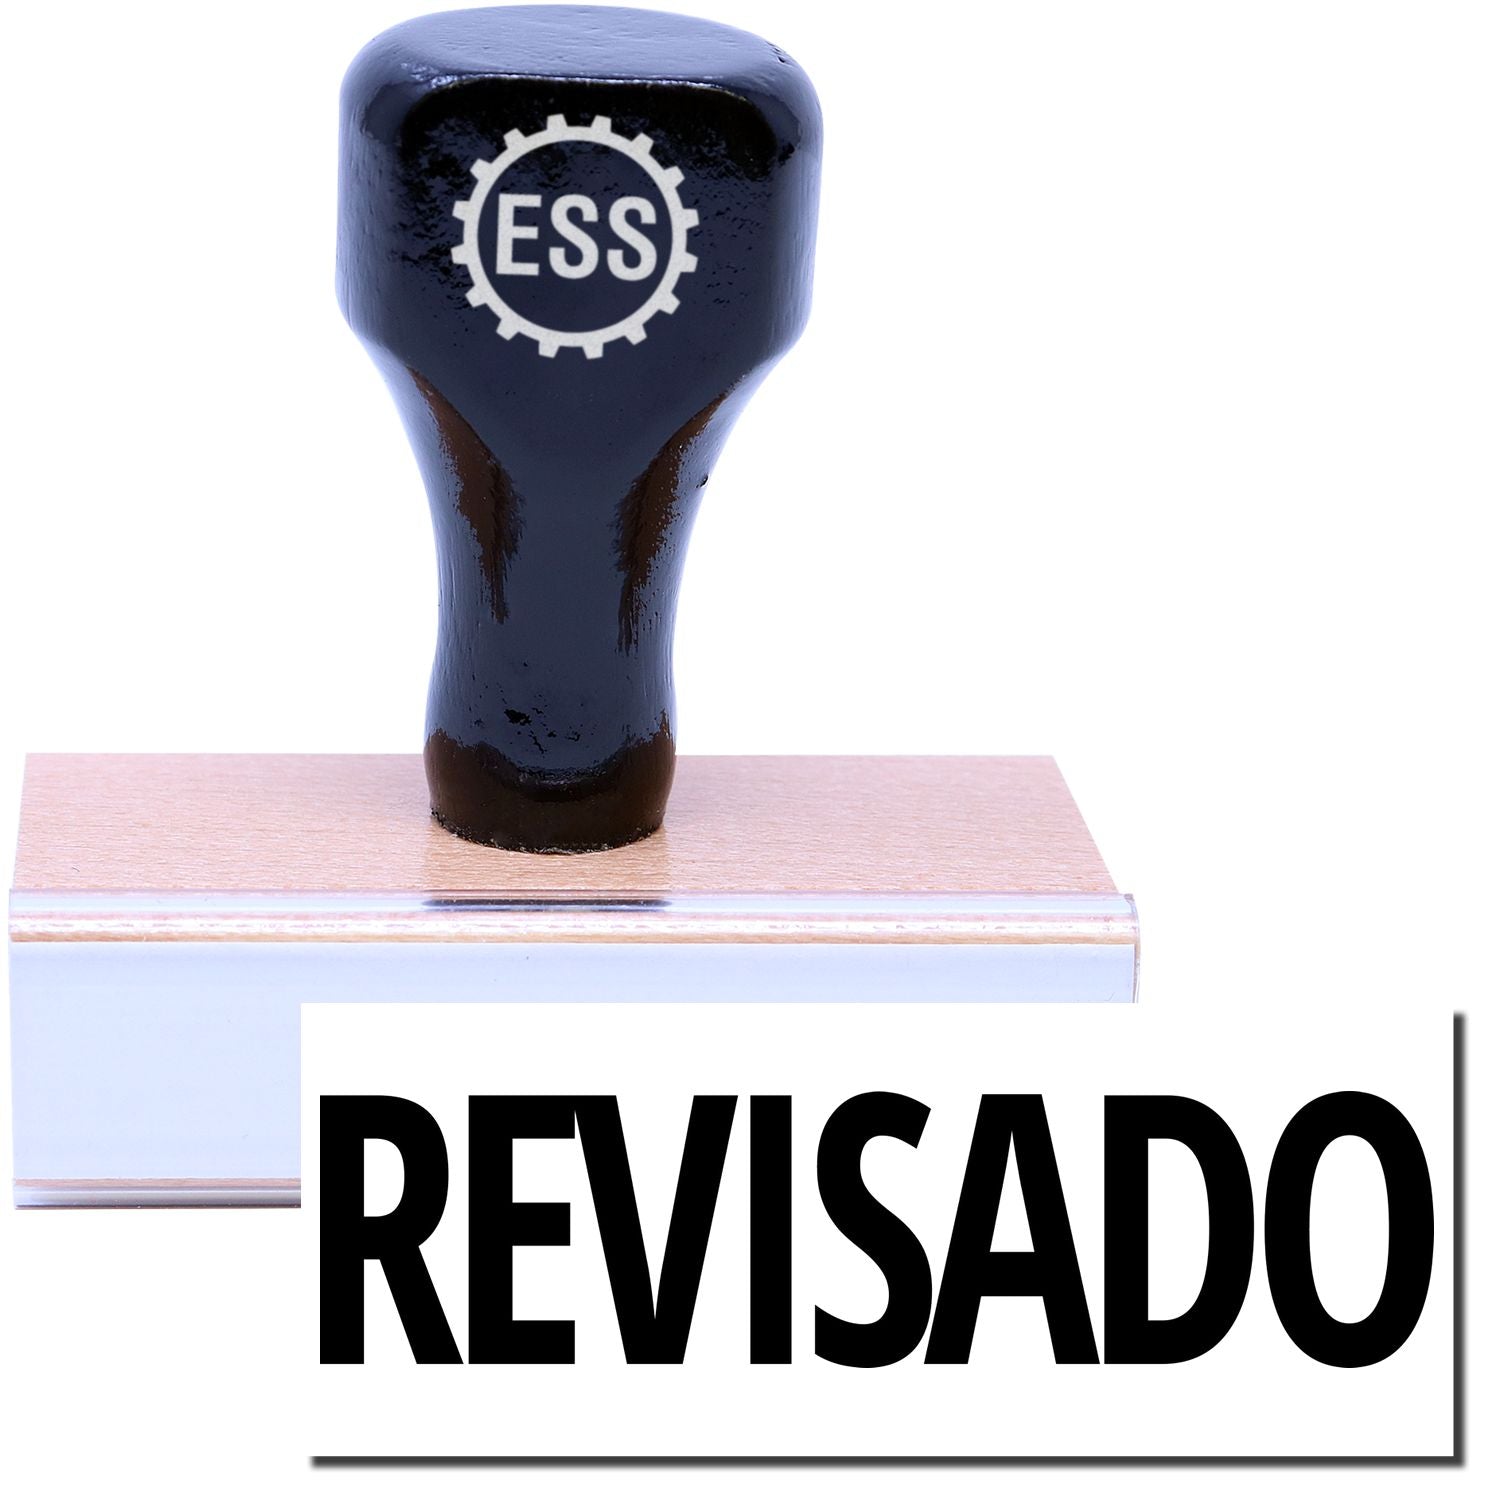 A stock office rubber stamp with a stamped image showing how the text "REVISADO" in a large font is displayed after stamping.